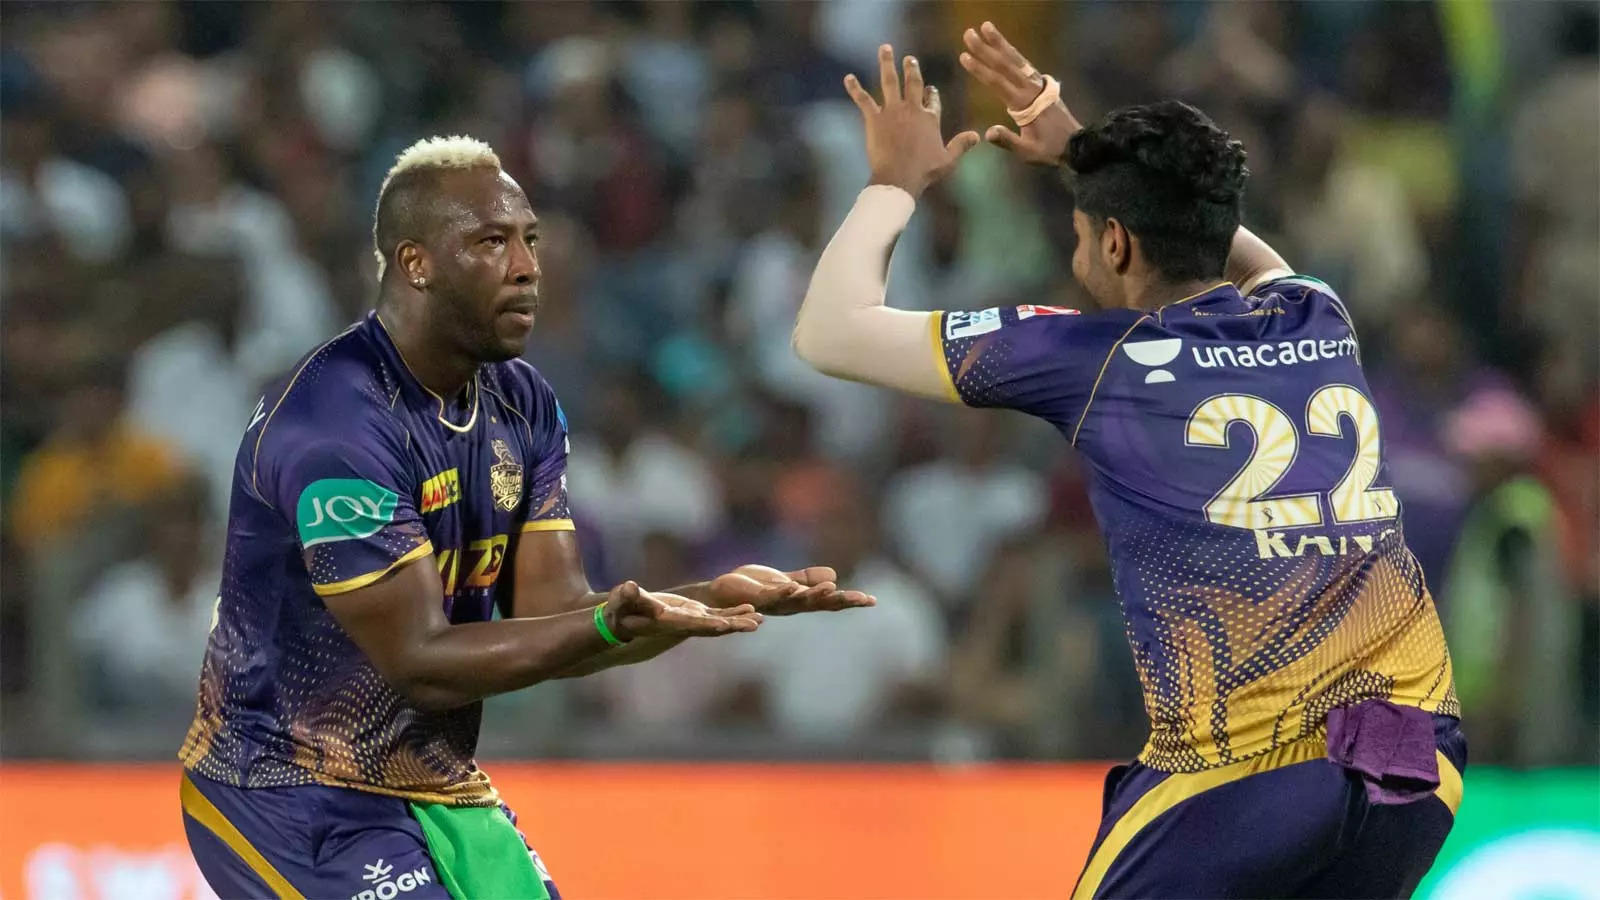 Andre Russell will be a threat to LSG in the match against KKR